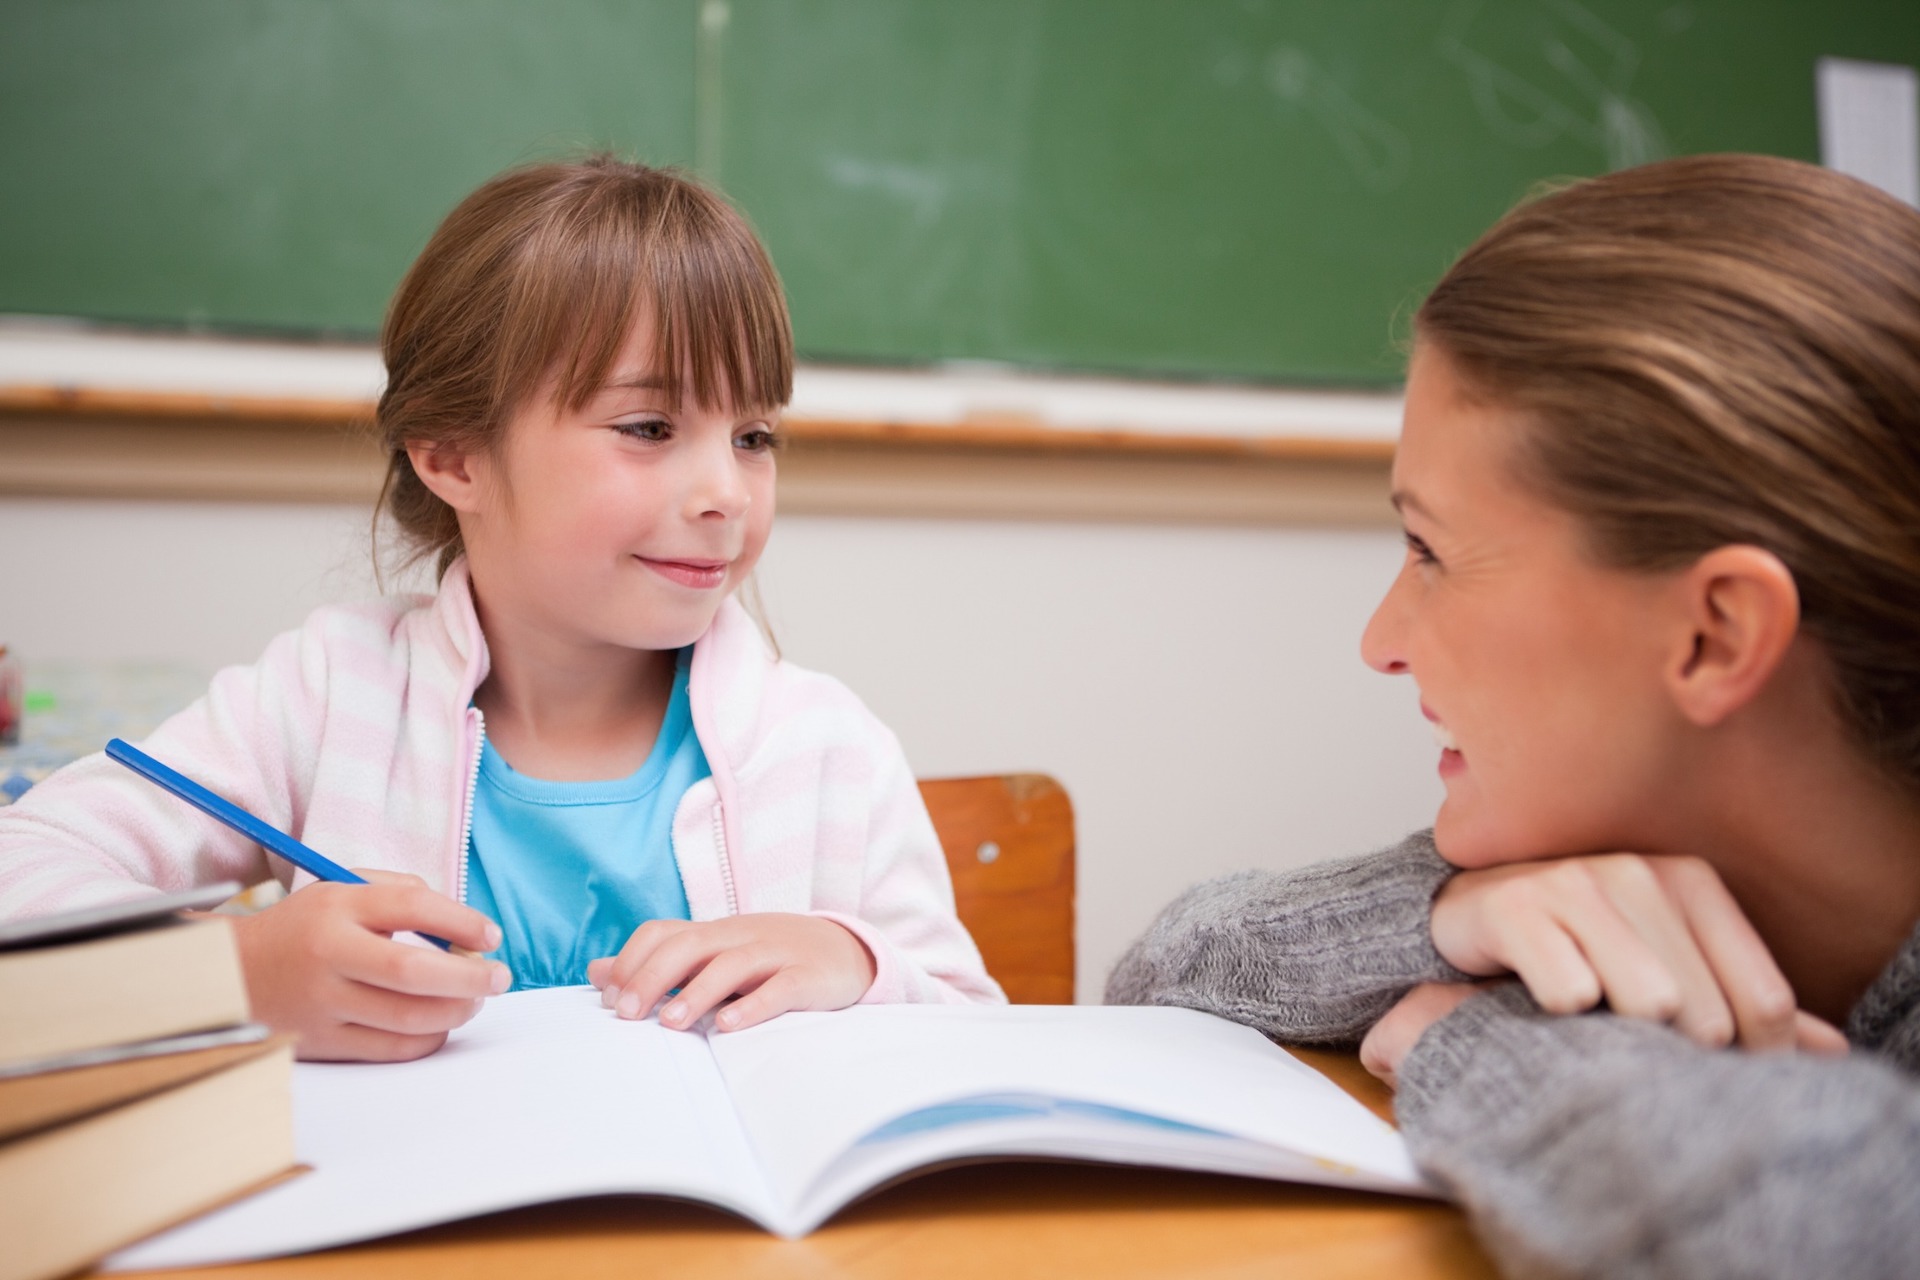 Supporting Students with Eating Disorders: Tips for Teachers